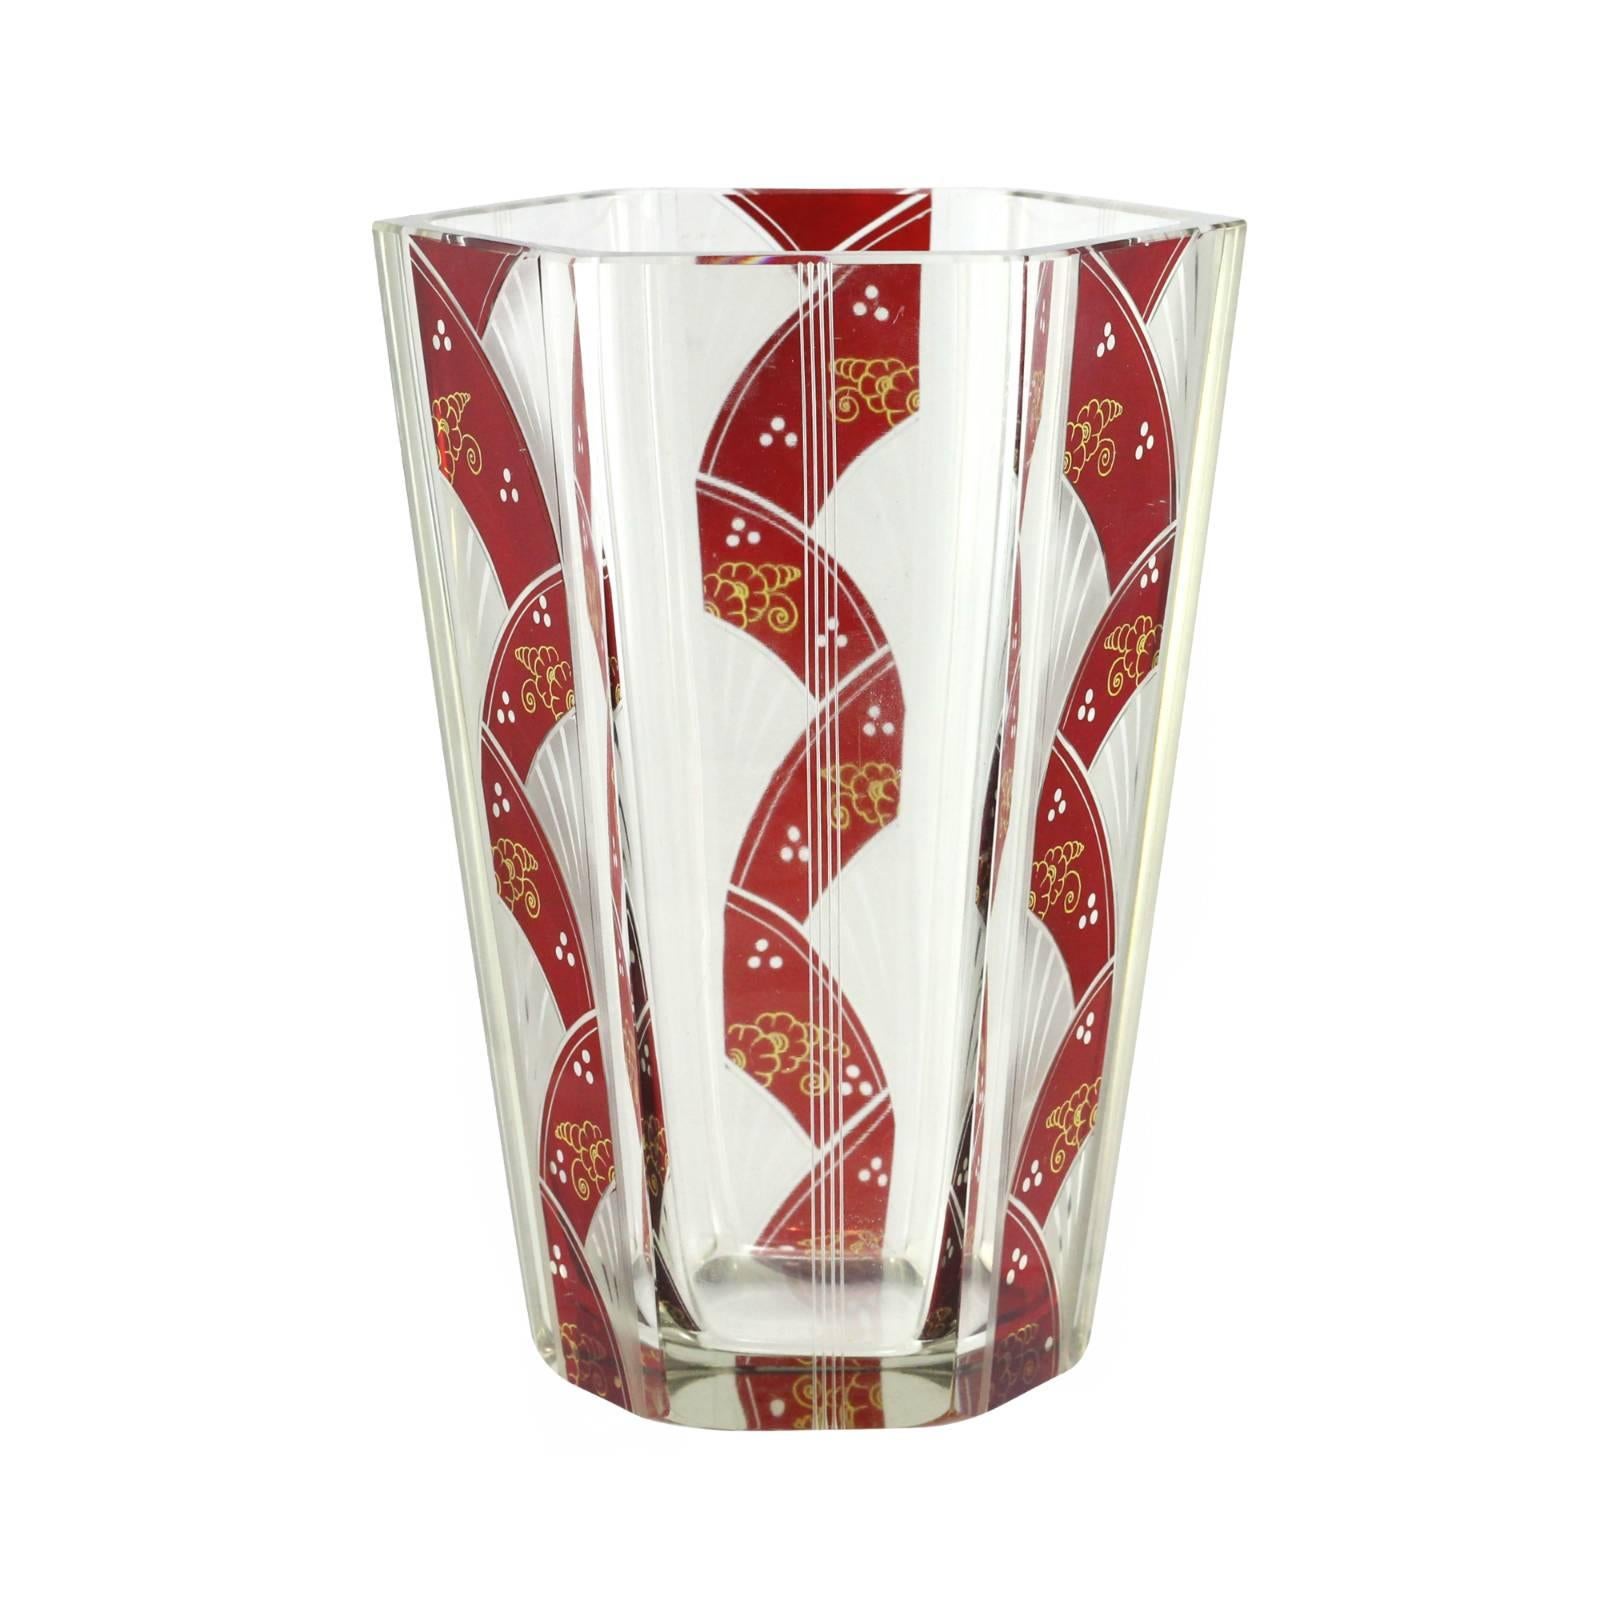 French Art Deco Etched Hexagonal Vase with Ruby Flashing by Karl Palda  For Sale